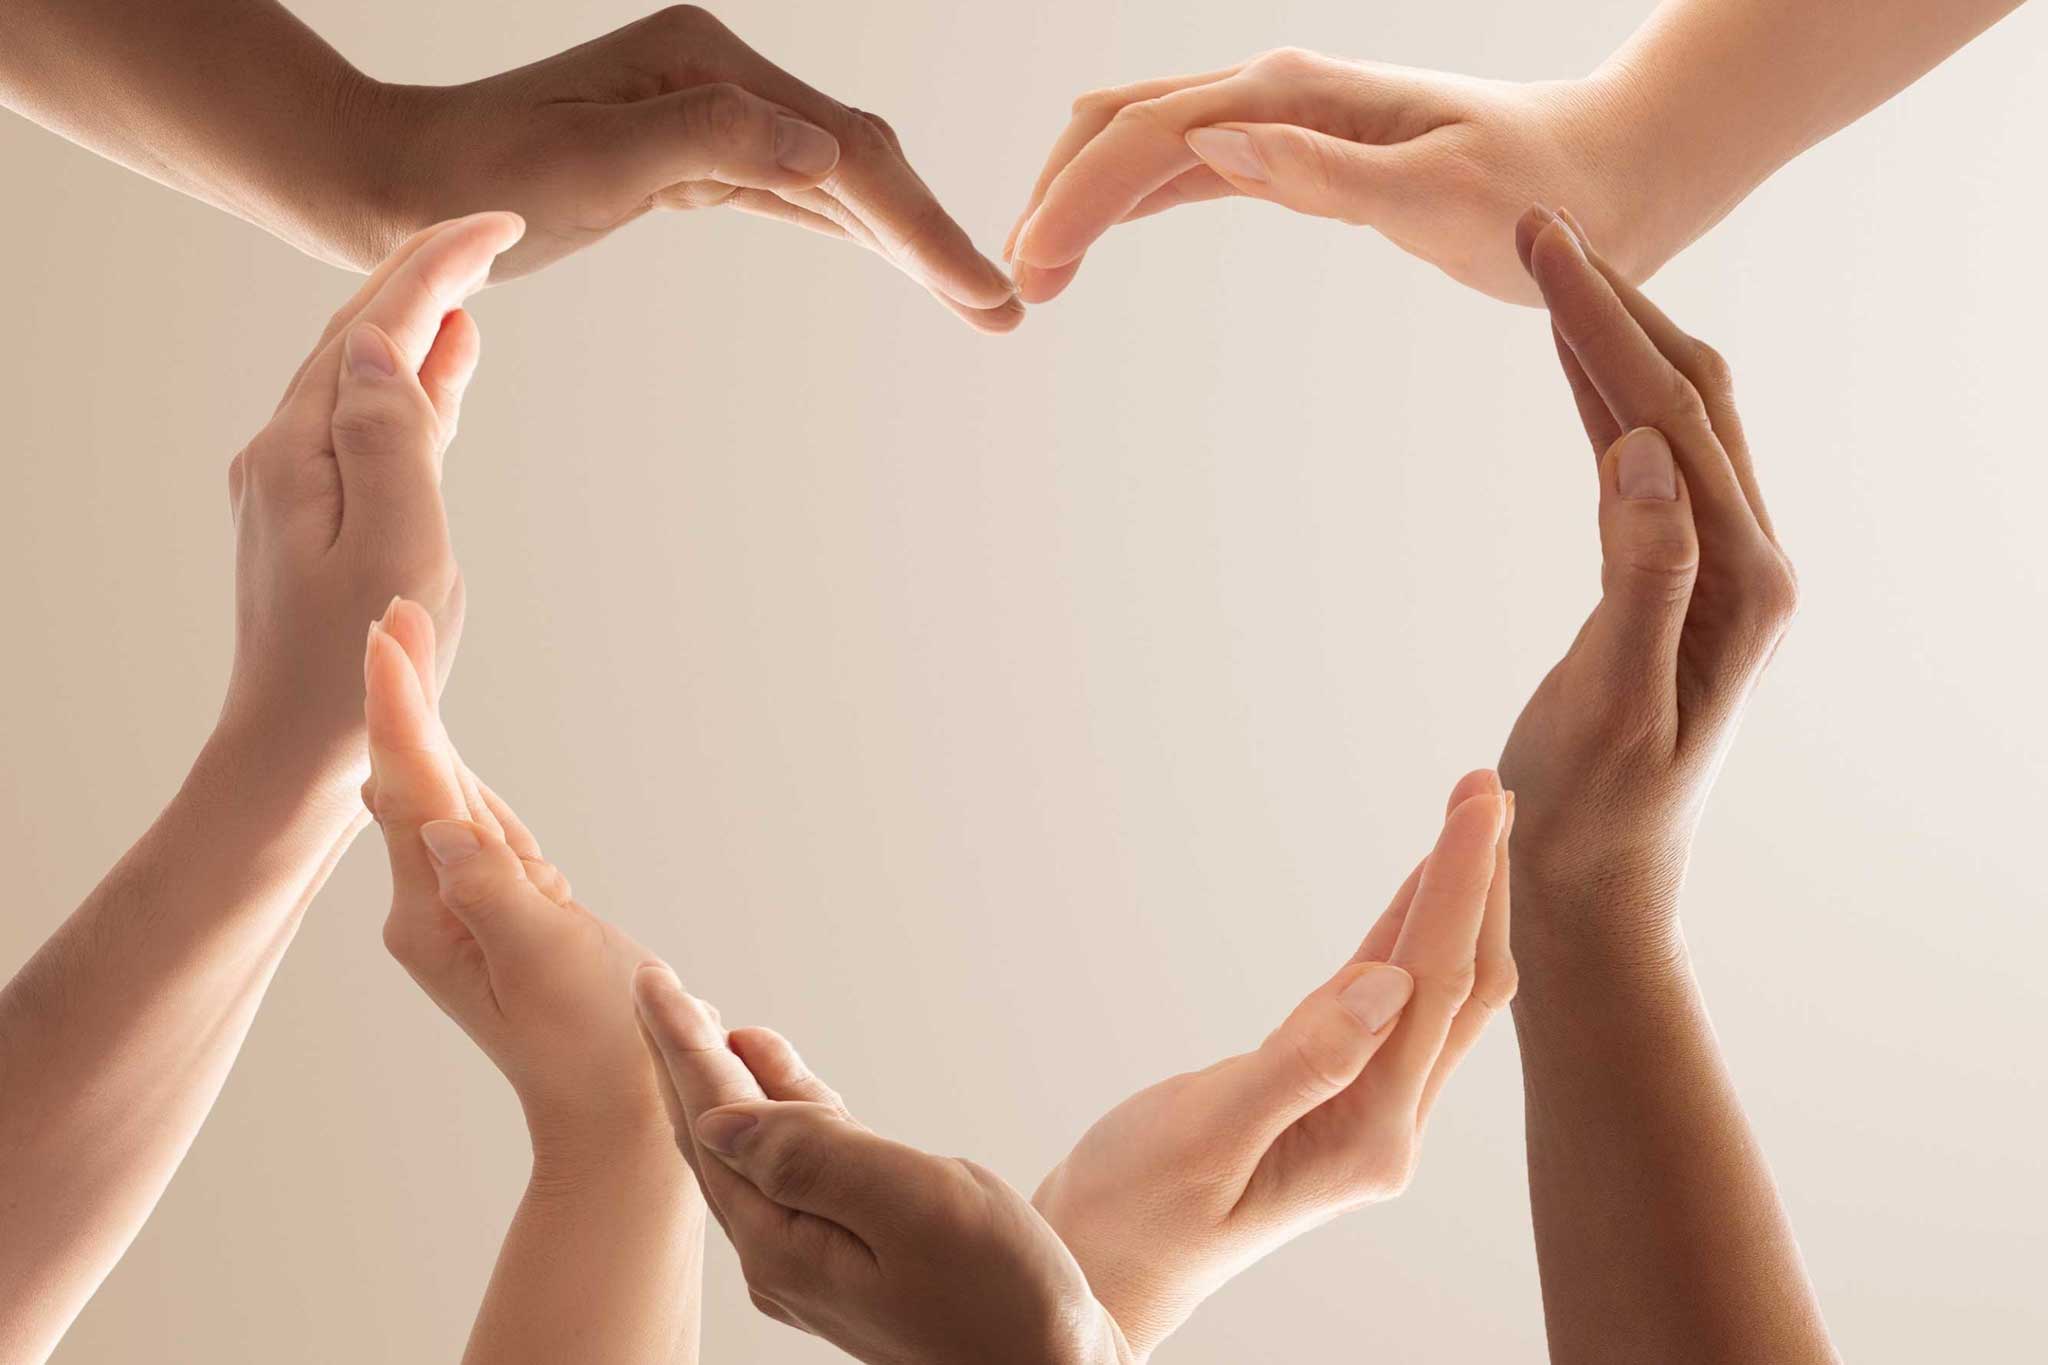 Photo of hands forming a heart shape